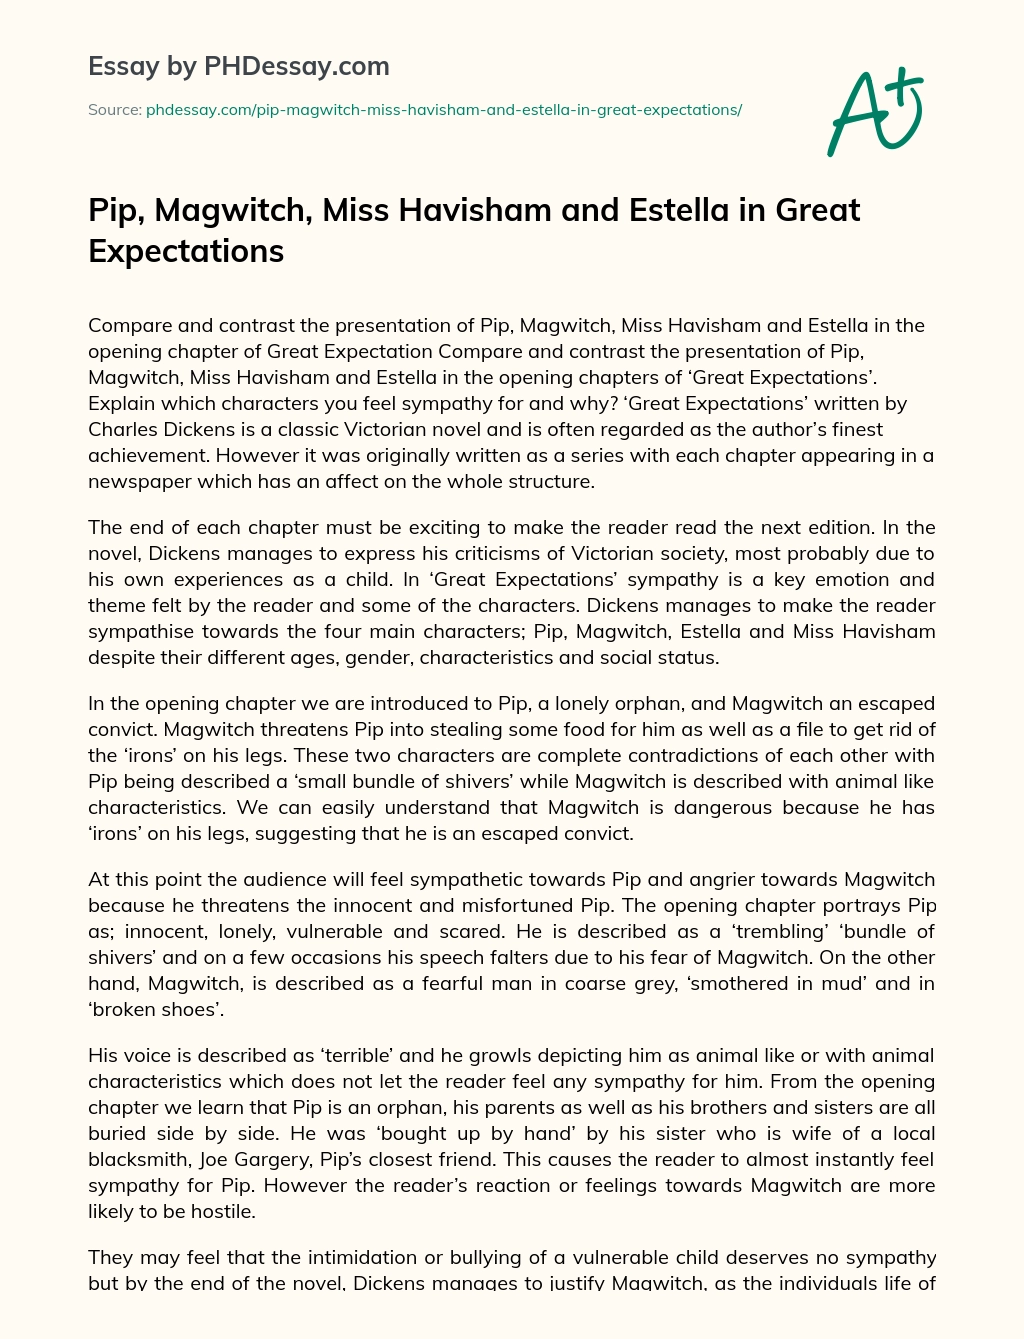 Pip, Magwitch, Miss Havisham and Estella in Great Expectations essay